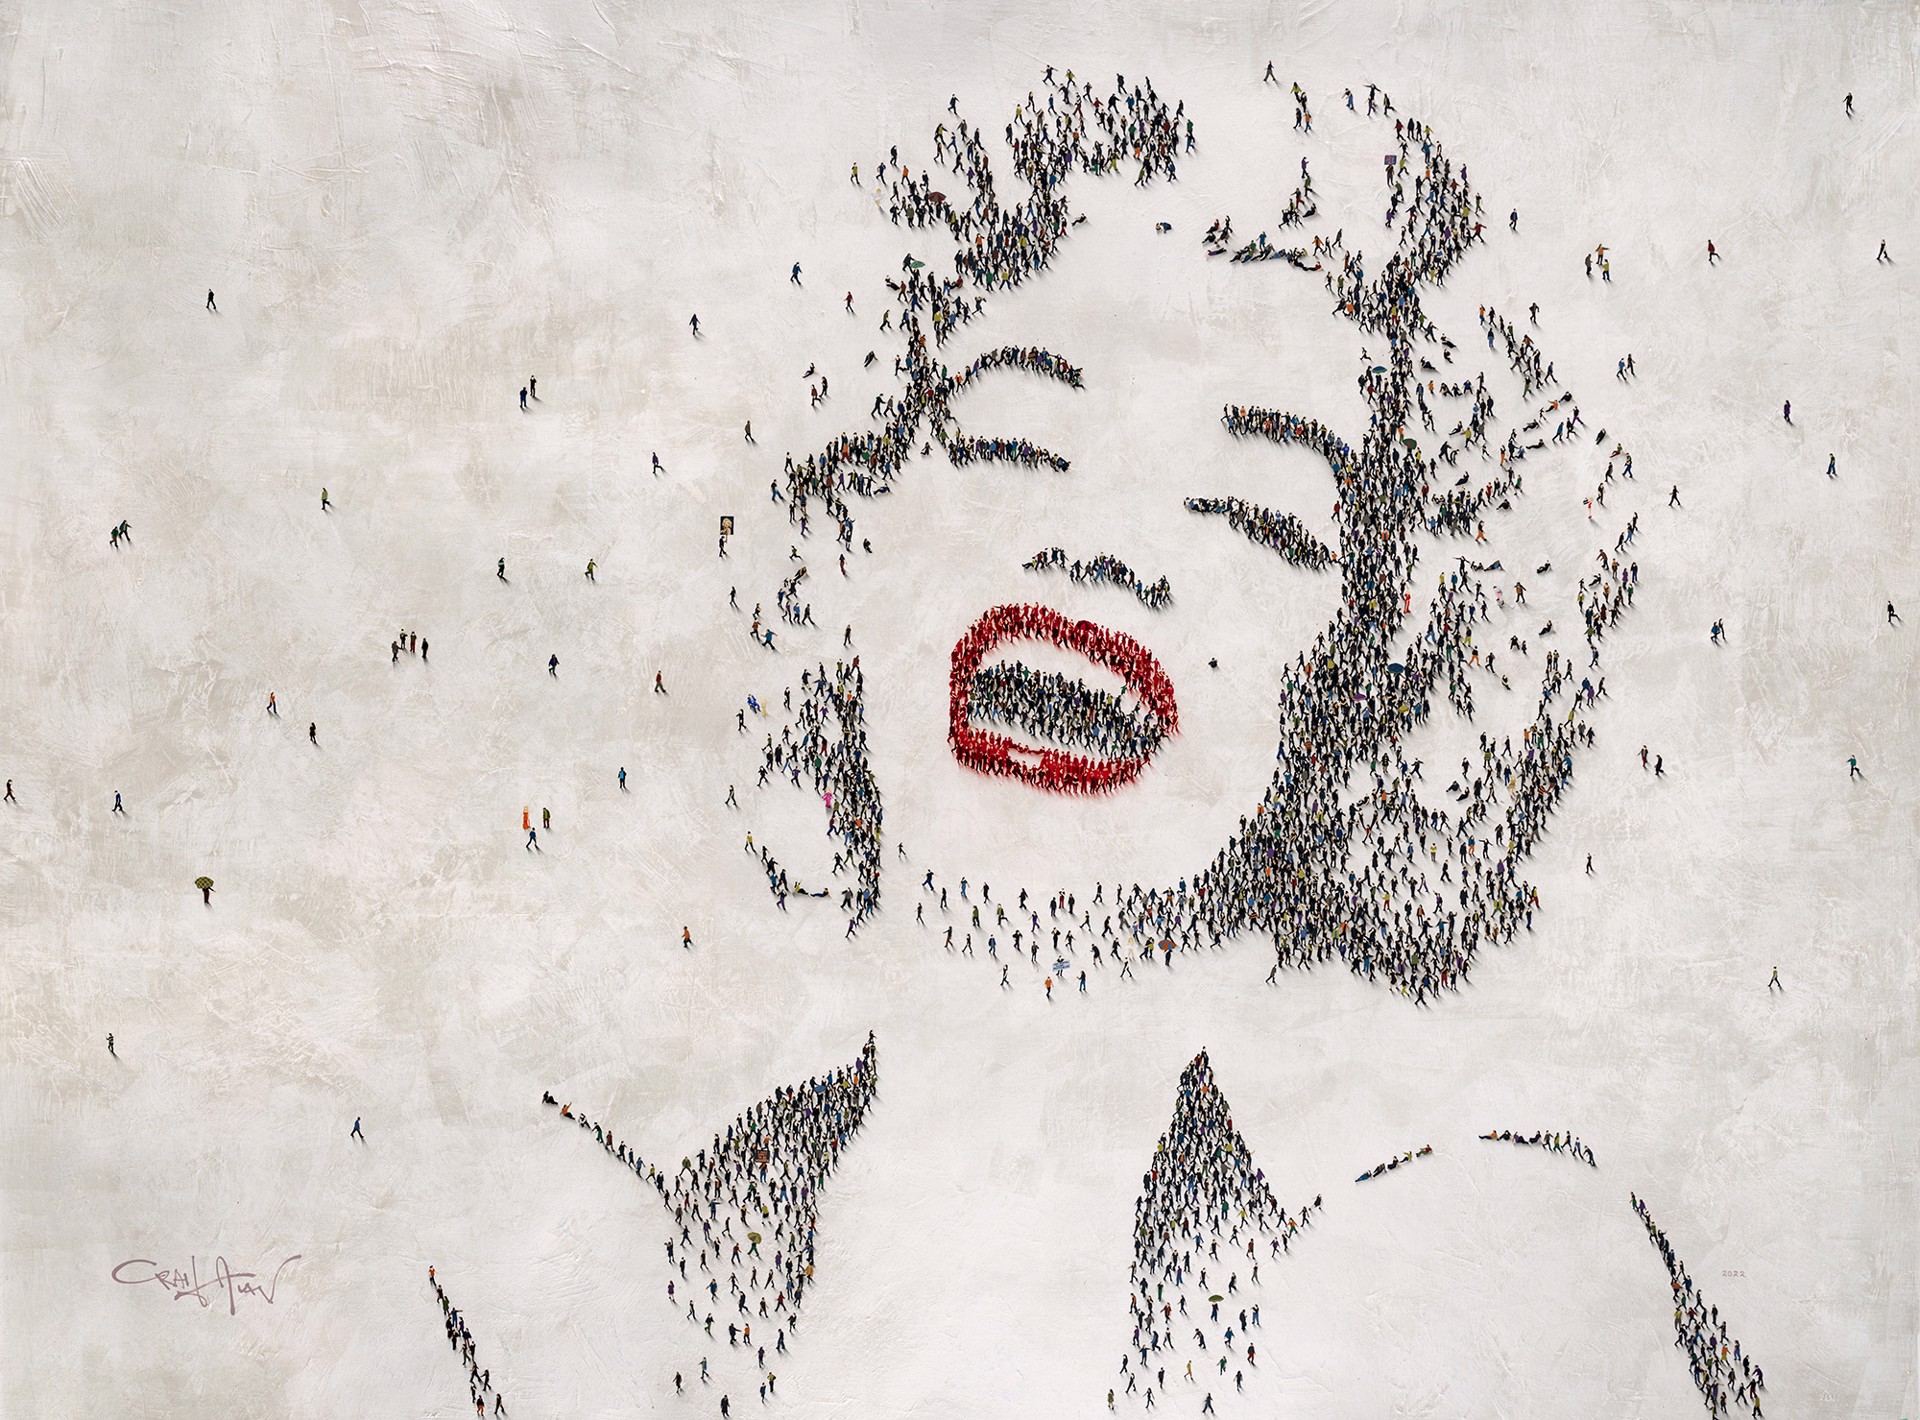 Marilyn by Craig Alan, Populus Commission